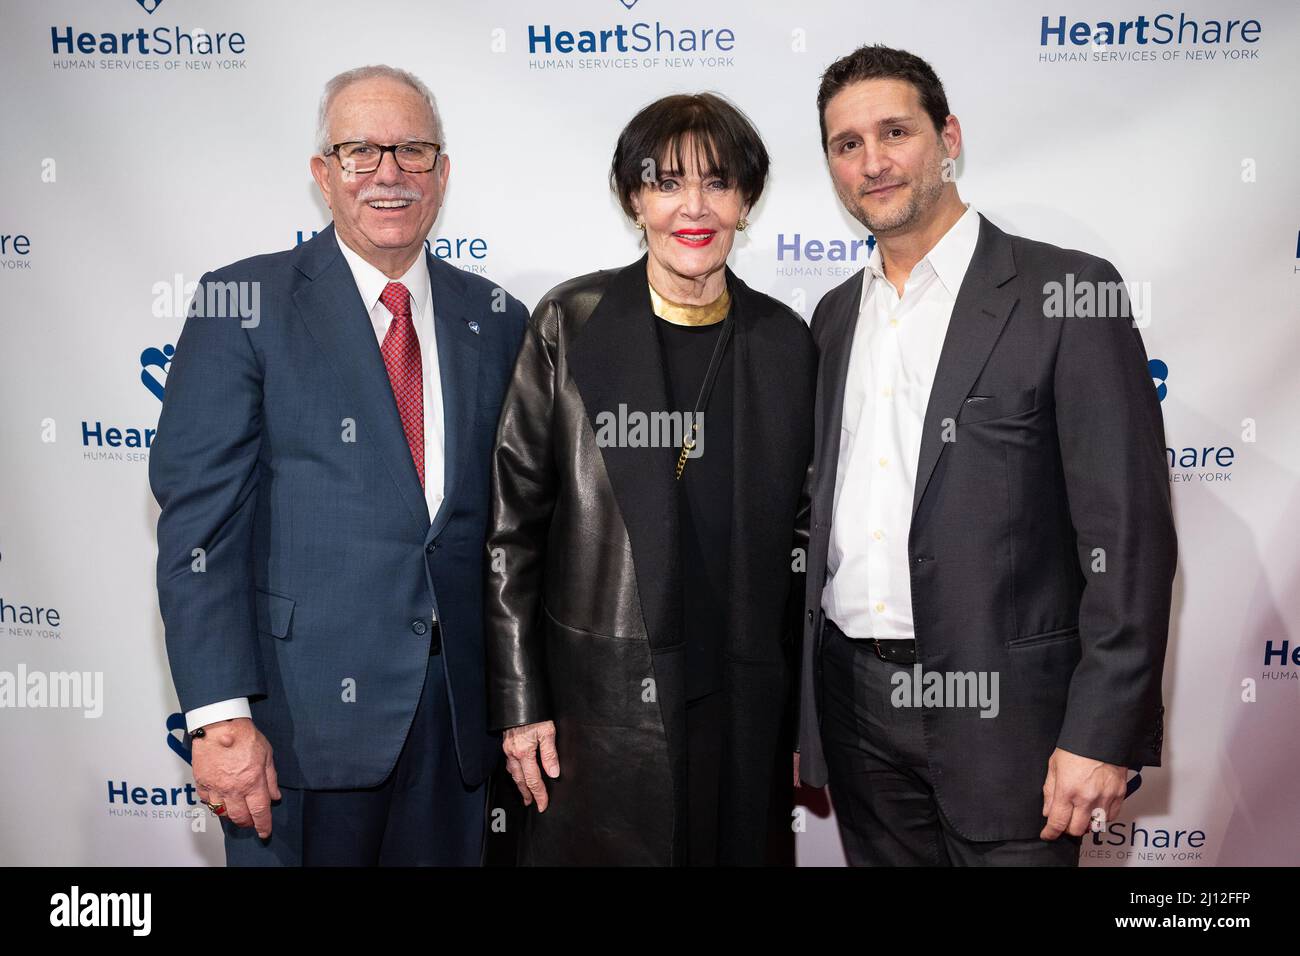 New York, USA. 21st Mar, 2022. (L-R) William R. Guarinello, Linda Dano and Jeff Marchetti attend The 2022 HeartShare Spring Gala at the Ziegfeld Ballroom in New York, New York, on Mar. 21, 2022. (Photo by Gabriele Holtermann/Sipa USA) Credit: Sipa USA/Alamy Live News Stock Photo